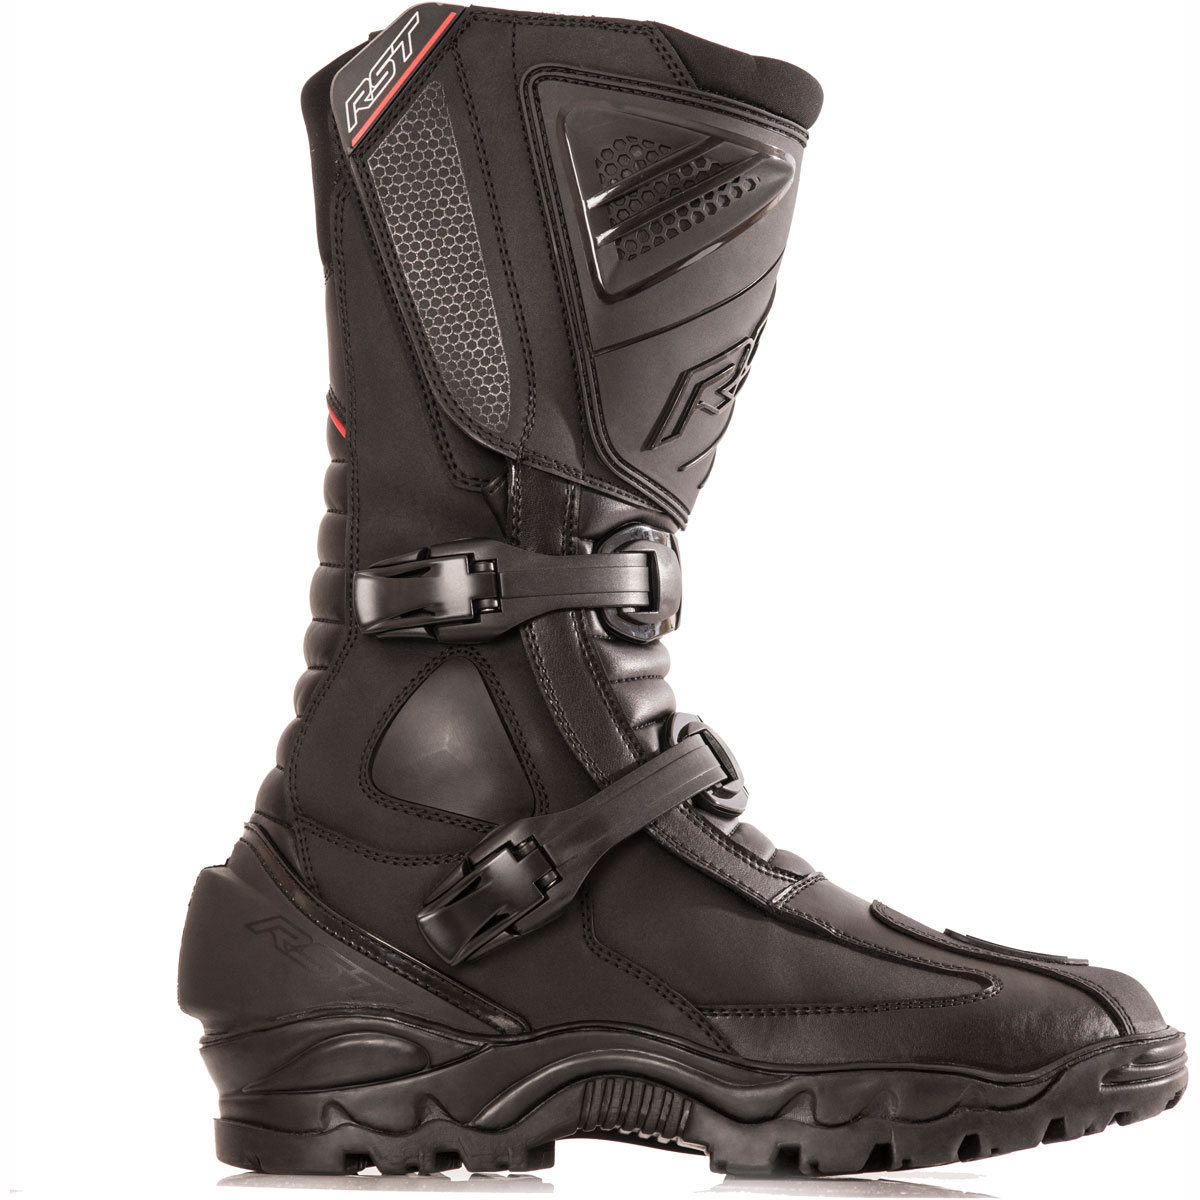 RST Adventure II boots